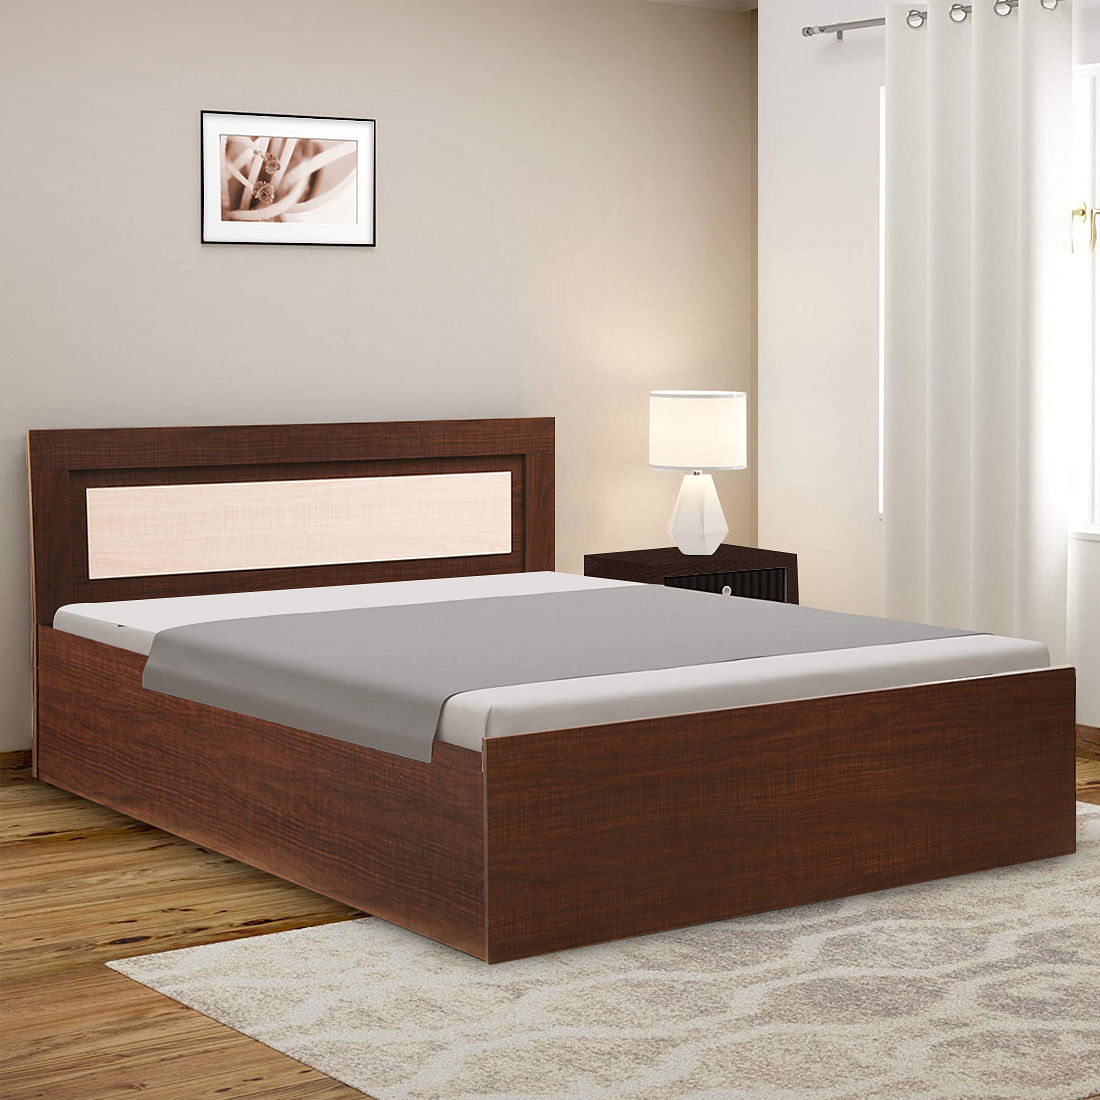 Buy Primus King Bed with Box Storage in Dark Choco Colour Online ...